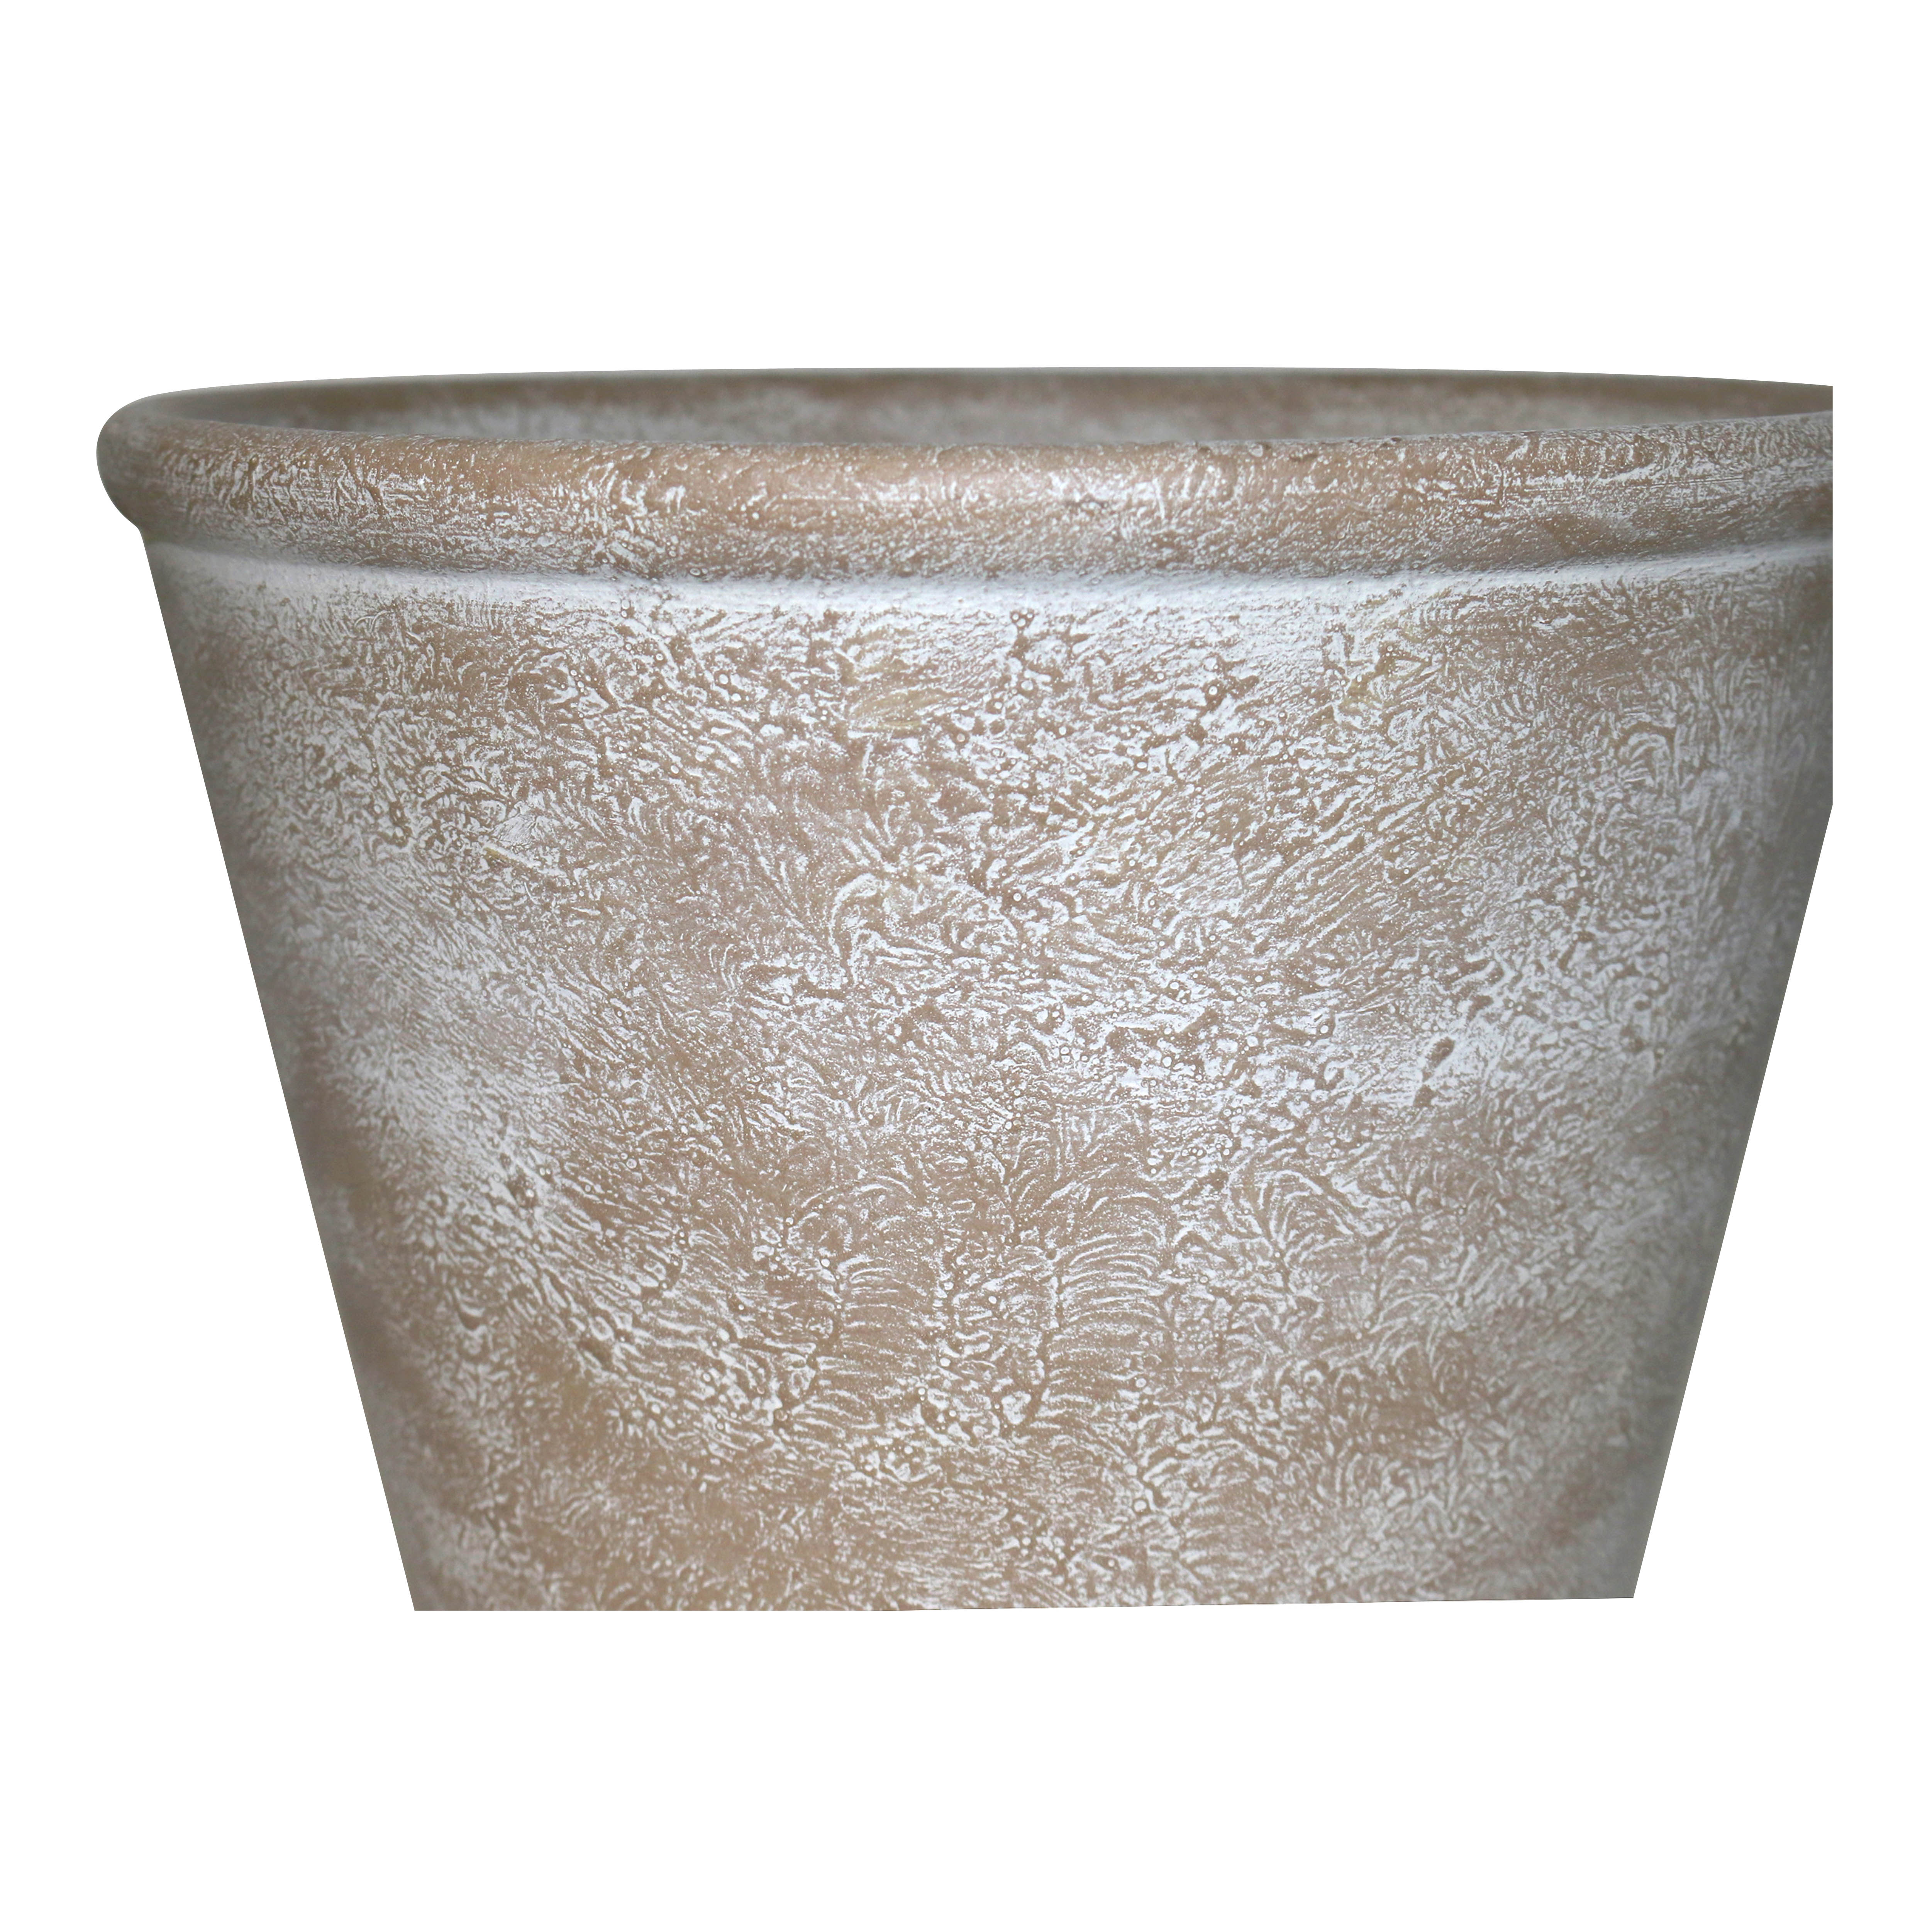 Better Homes&gardens 10 inch Hand-painted Brown Ceramic Pot - image 5 of 9